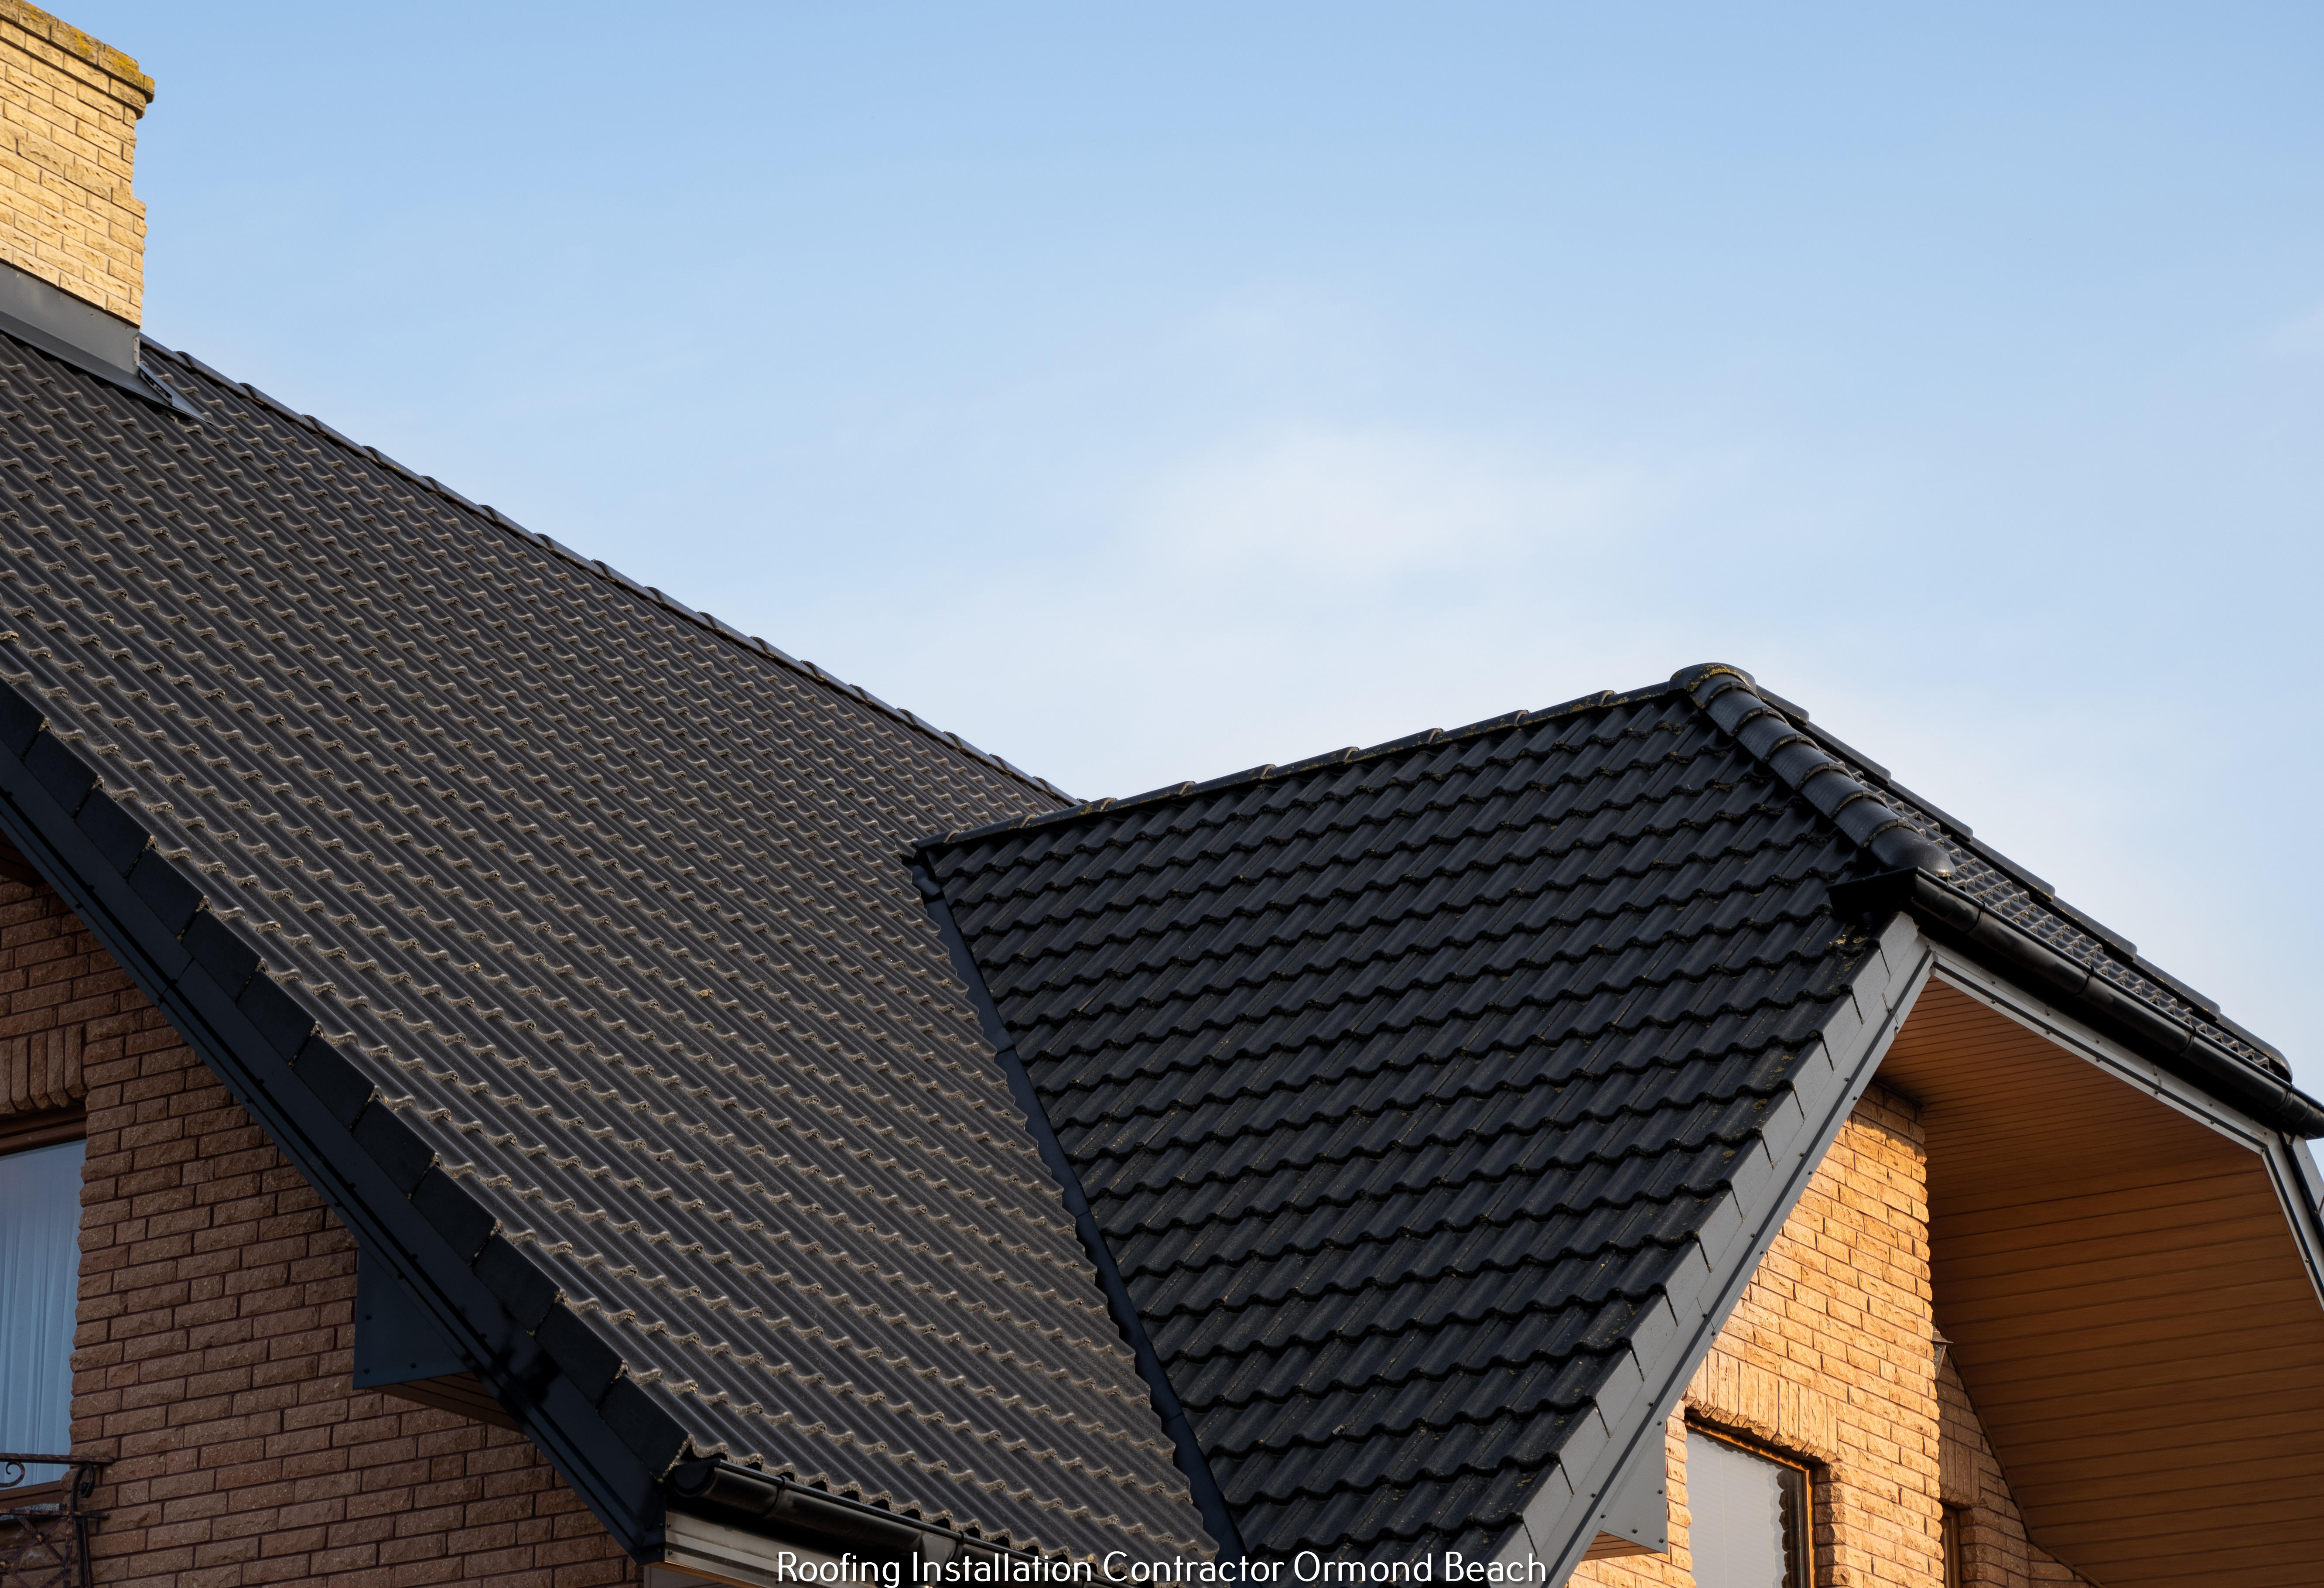 WKL Roofing Elaborates on the Services It Offers to Ormond Beach Services